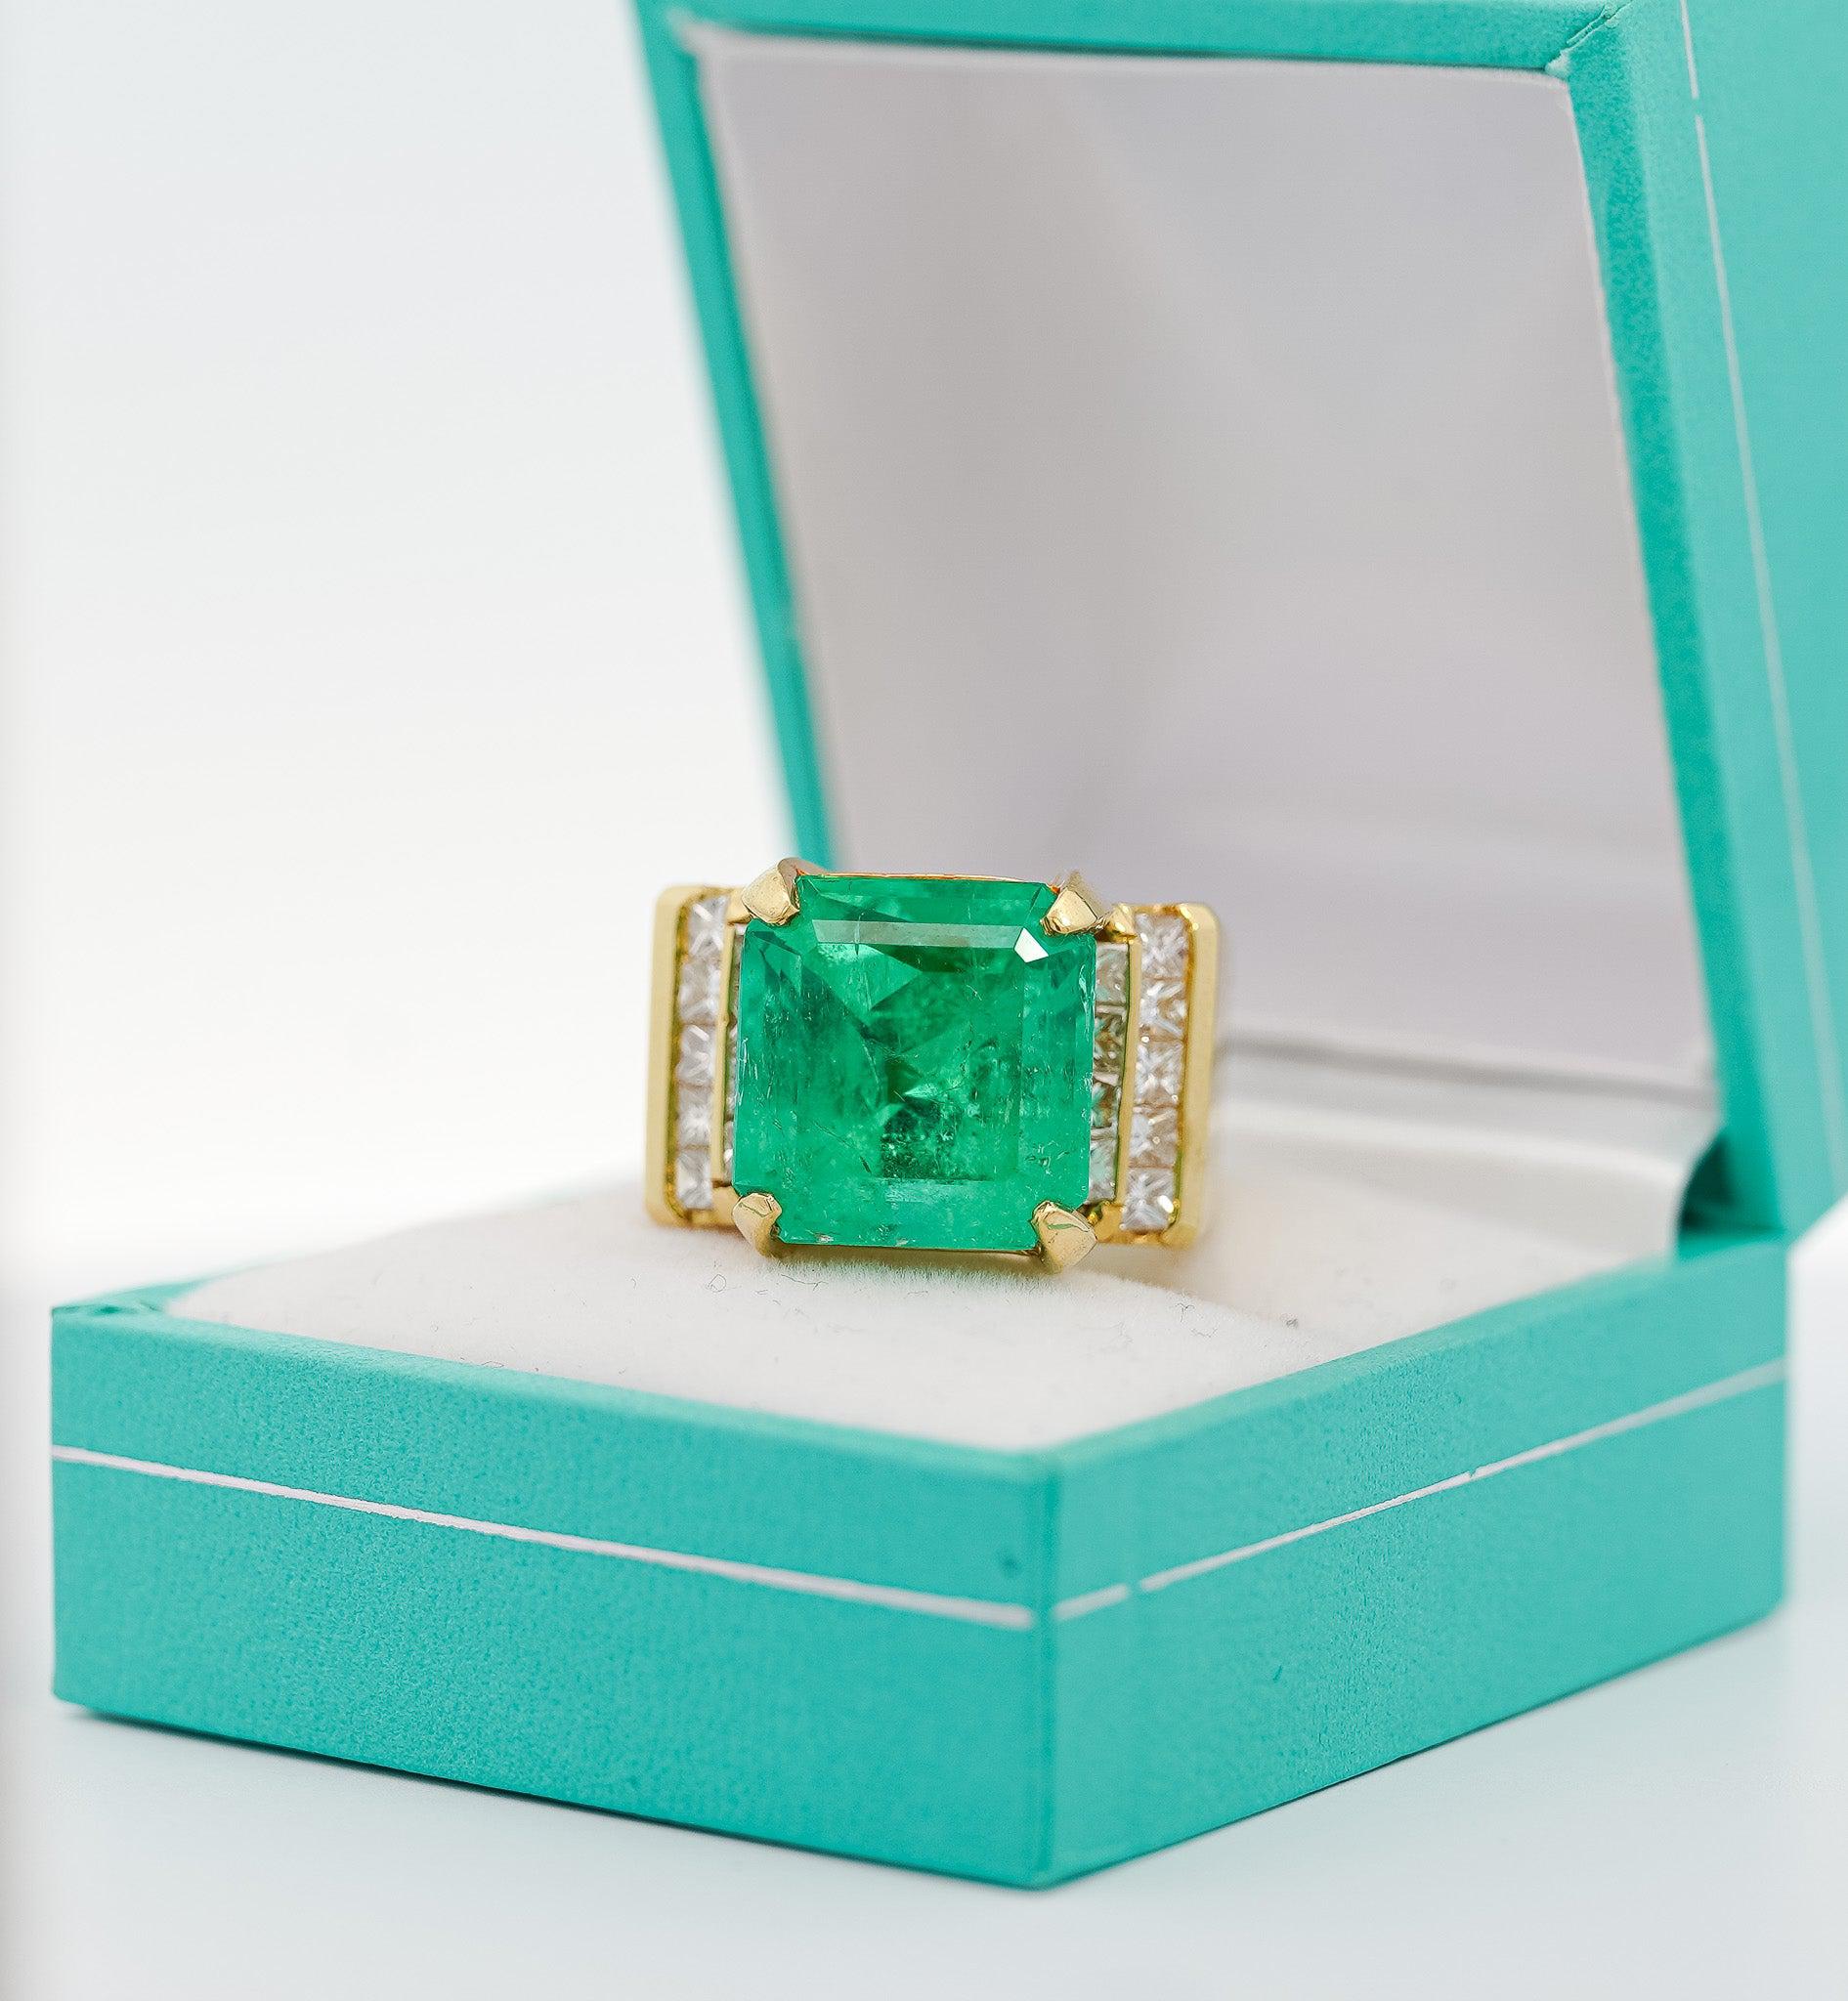 GIA-Certified-13-Carat-Colombian-Emerald-Mens-Ring-in-18K-Gold-With-Princess-Cut-Diamonds-Rings-2.jpg